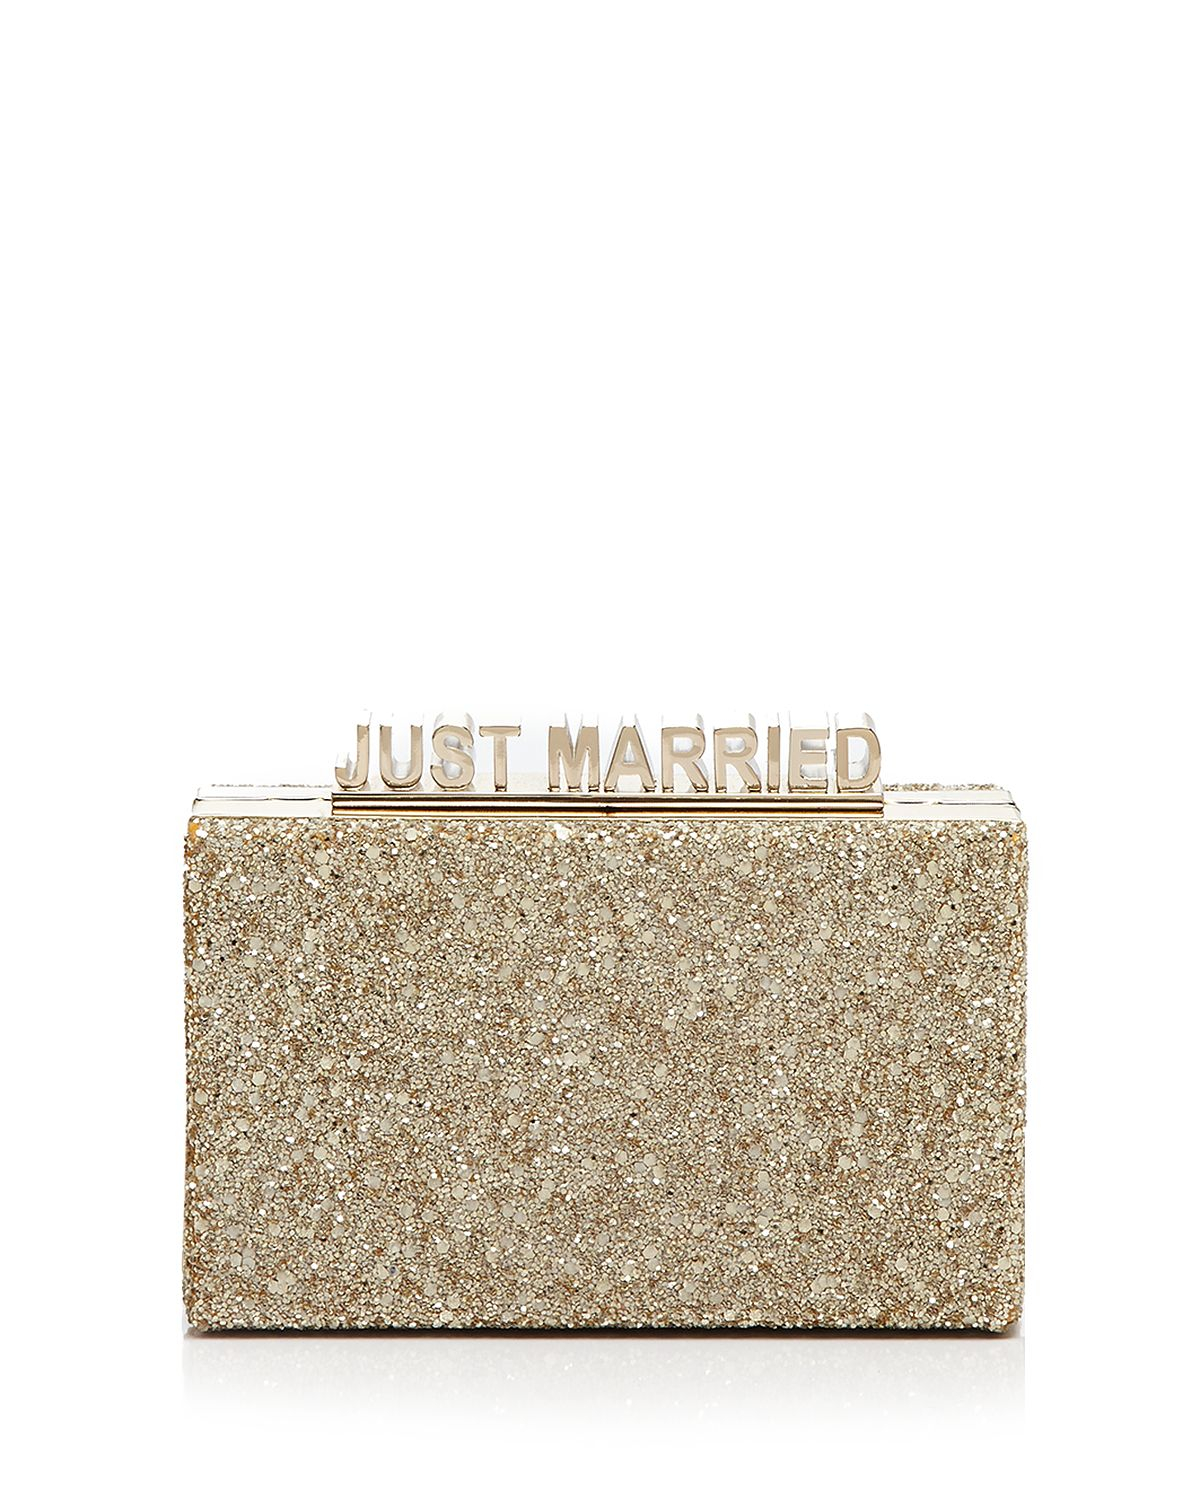 Just Married Clutch Flash Sales, SAVE 56%.